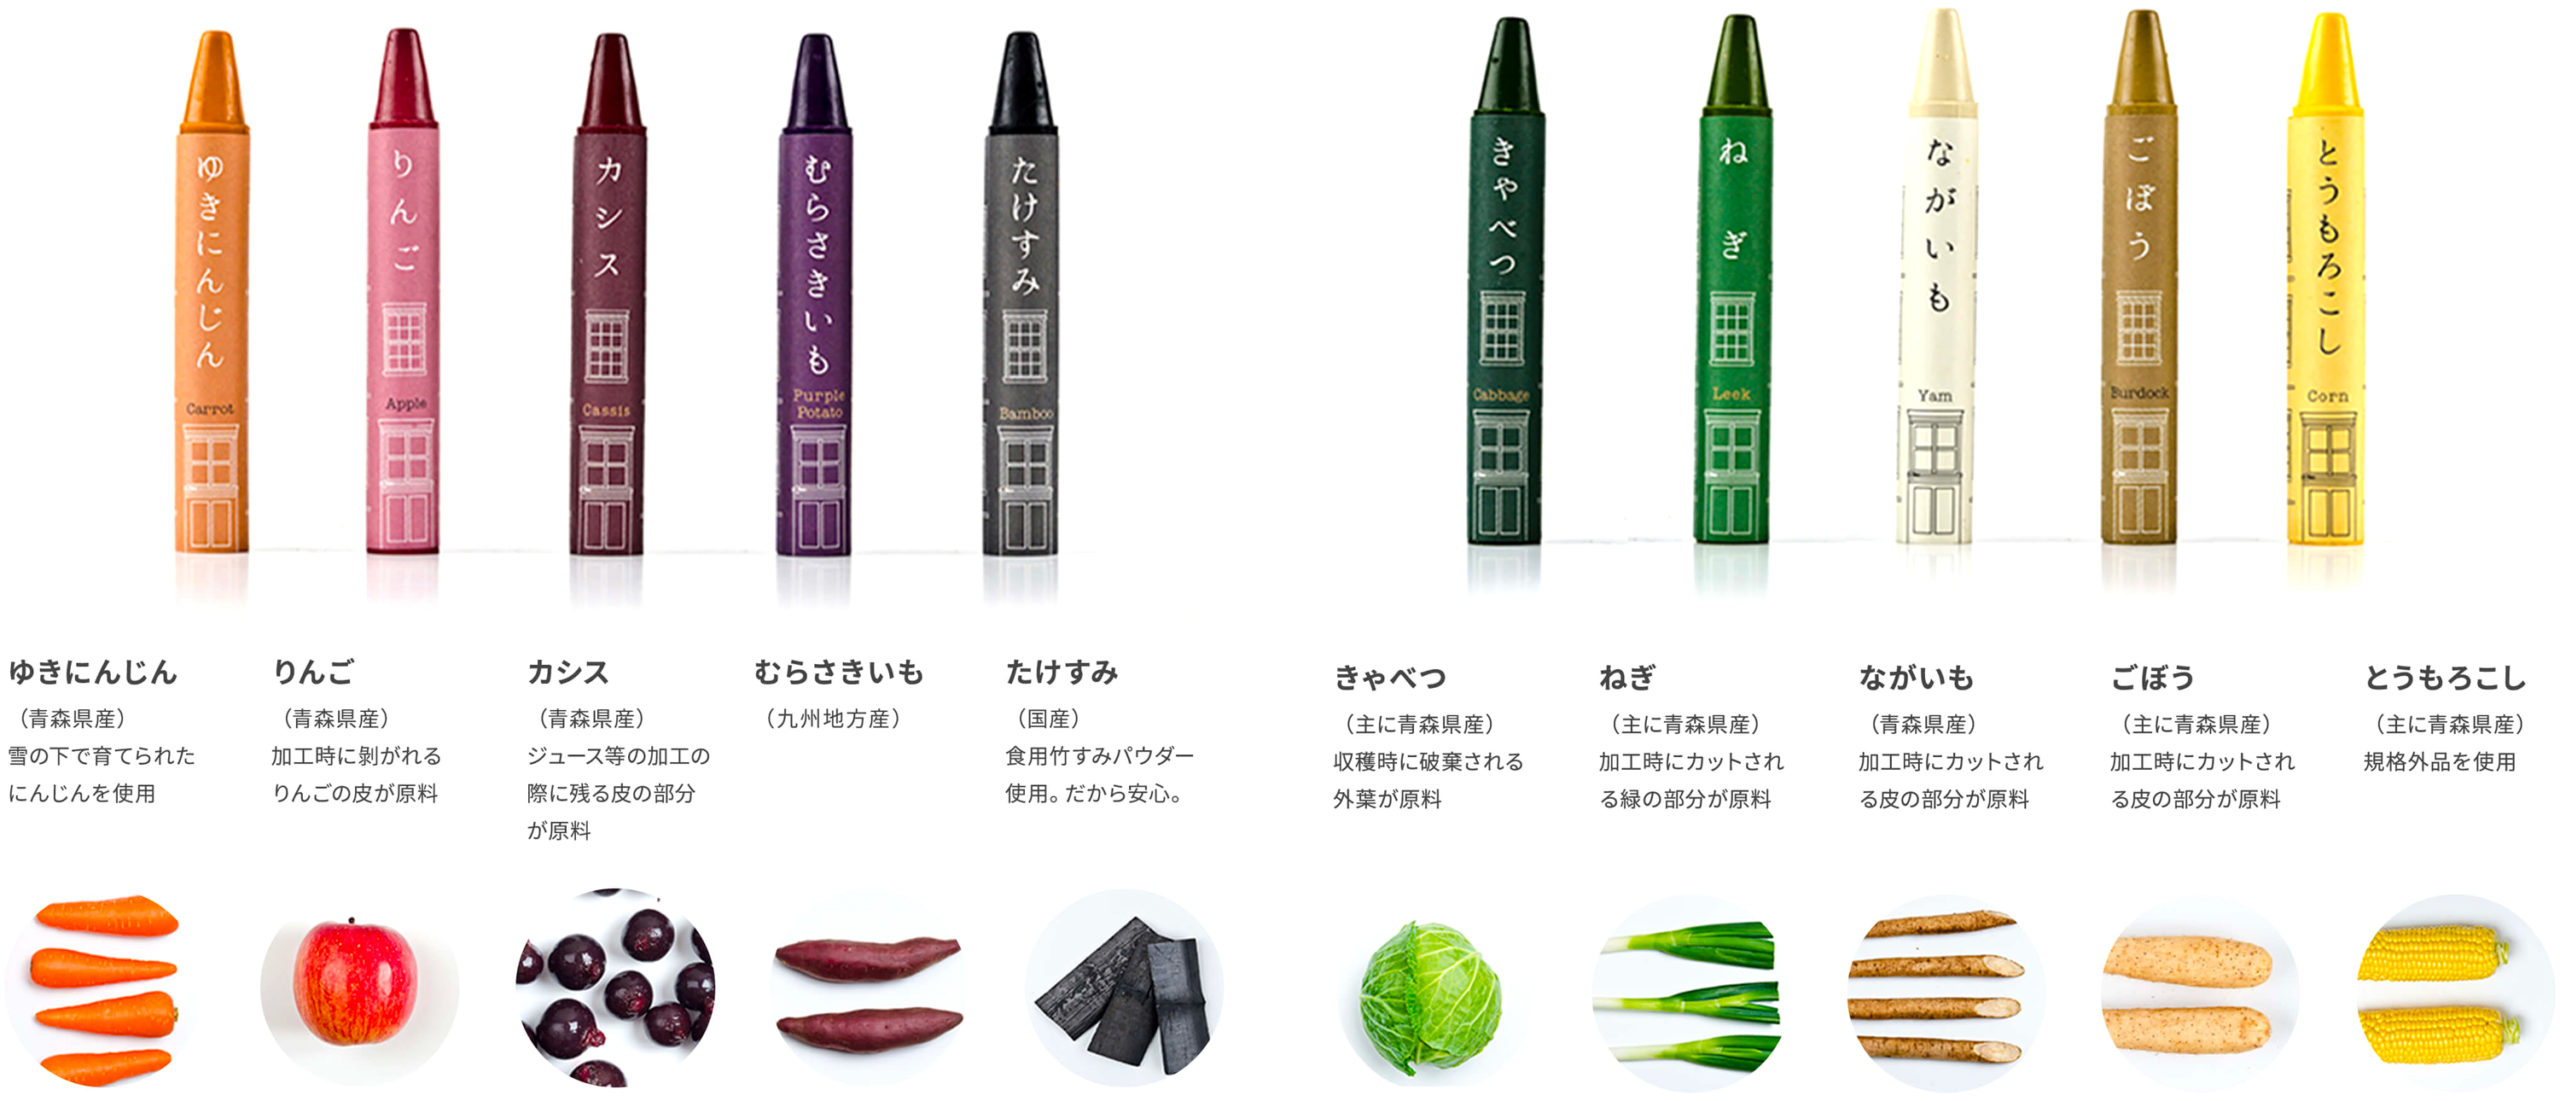 You Might Actually Want Your Kids to Eat These Crayons Made From Rice and Vegetable Waste